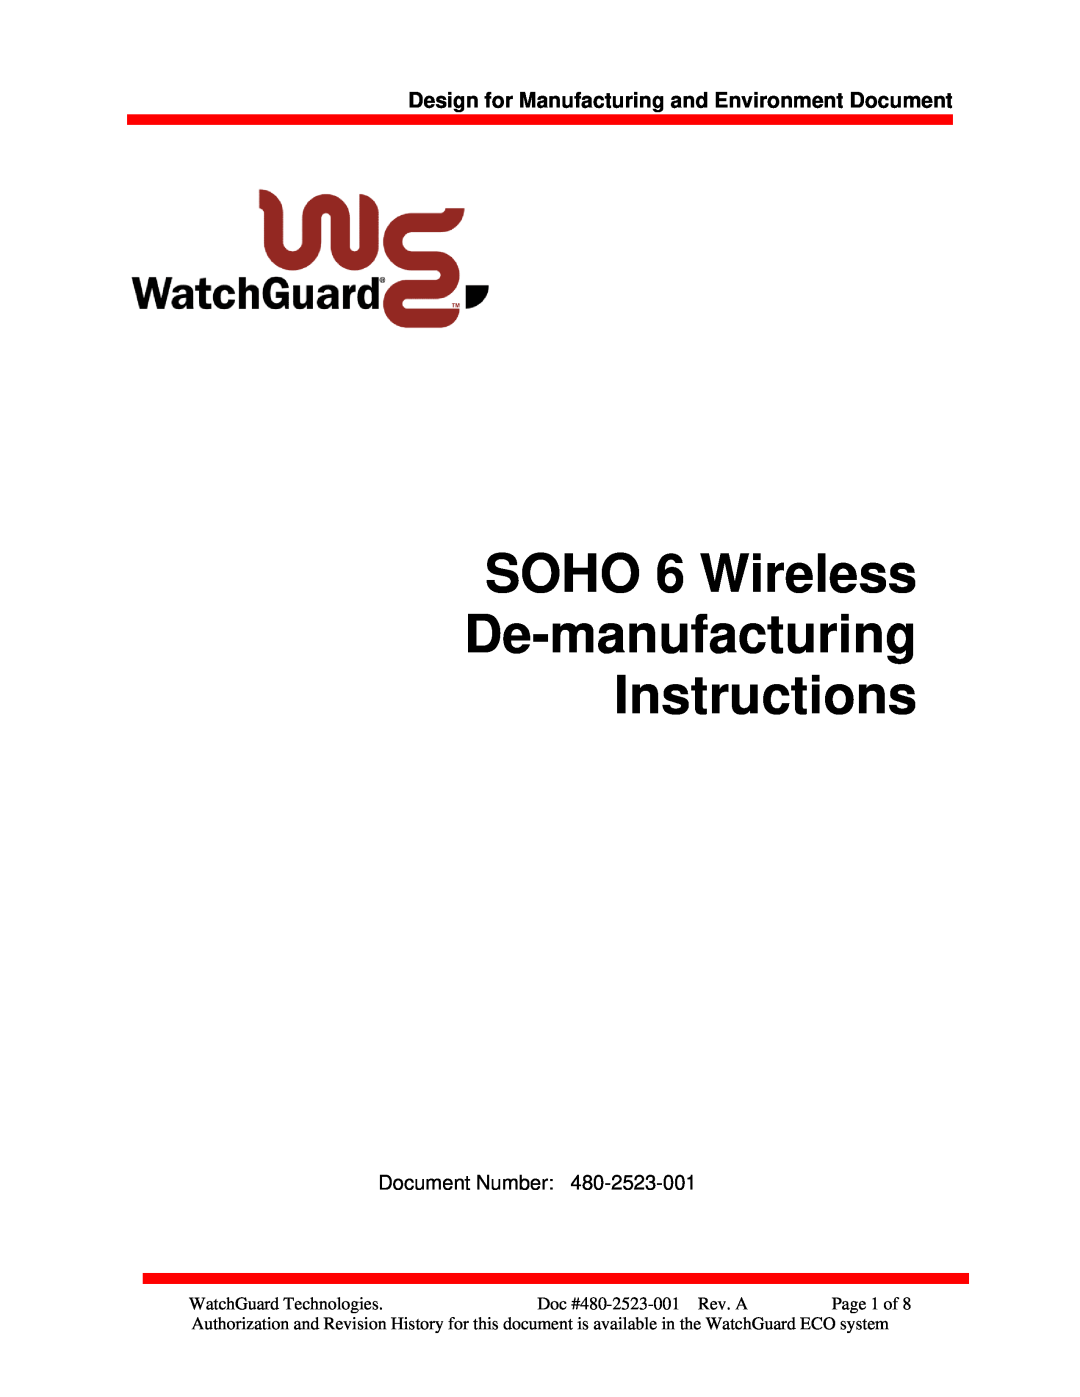 WatchGuard Technologies SOHO 6 manual Design for Manufacturing and Environment Document, Document Number 